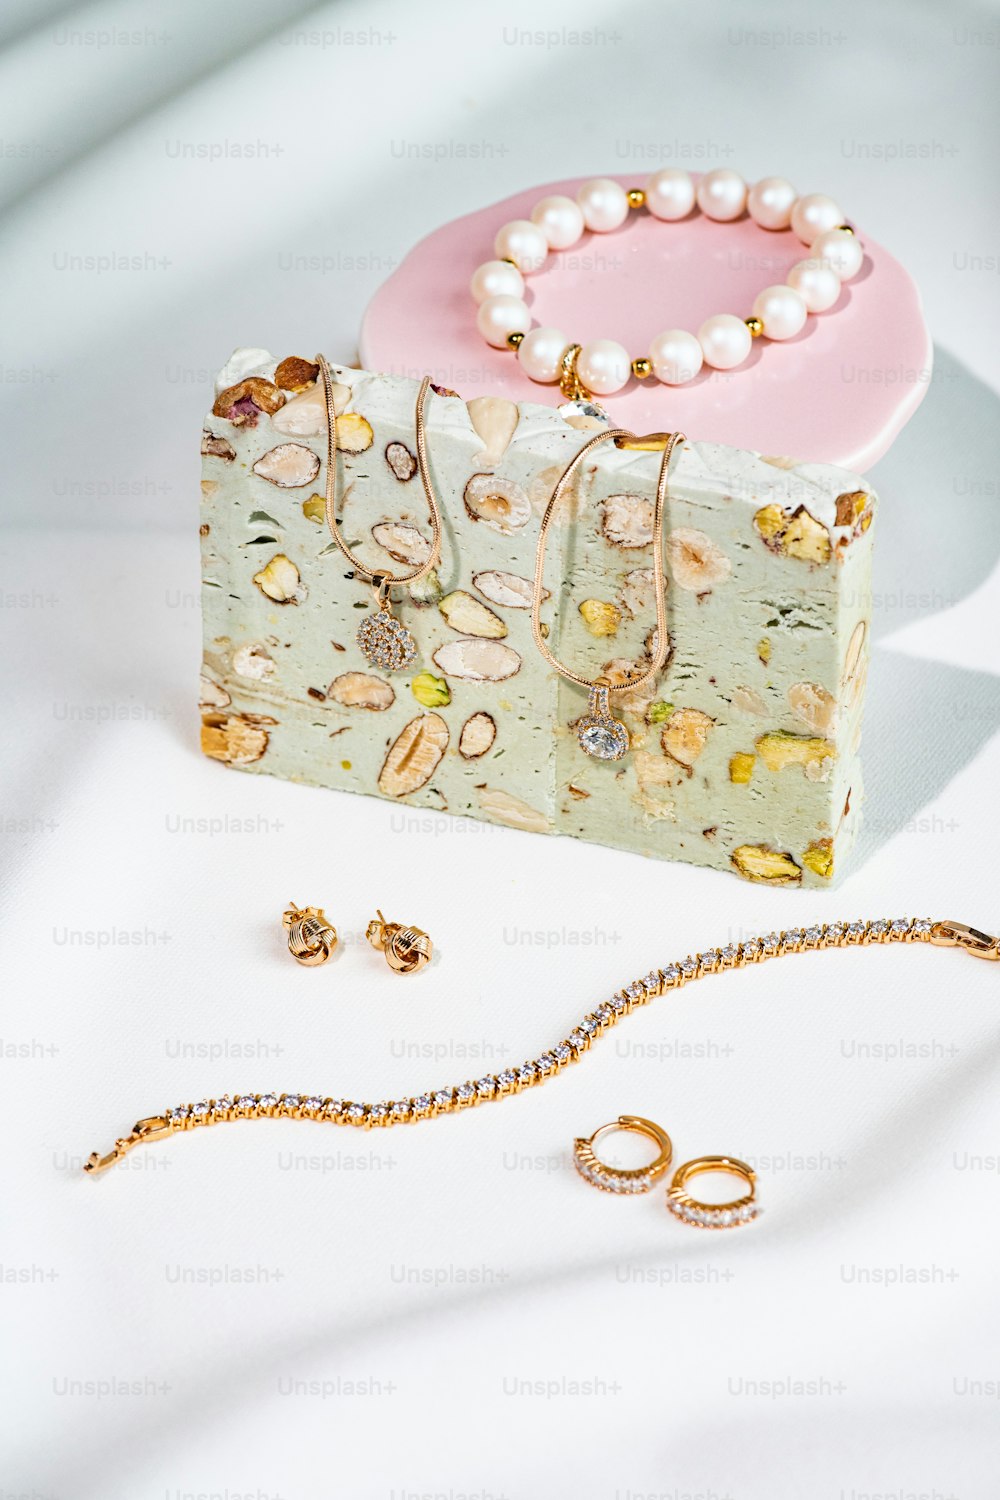 a jewelry box with pearls and a necklace